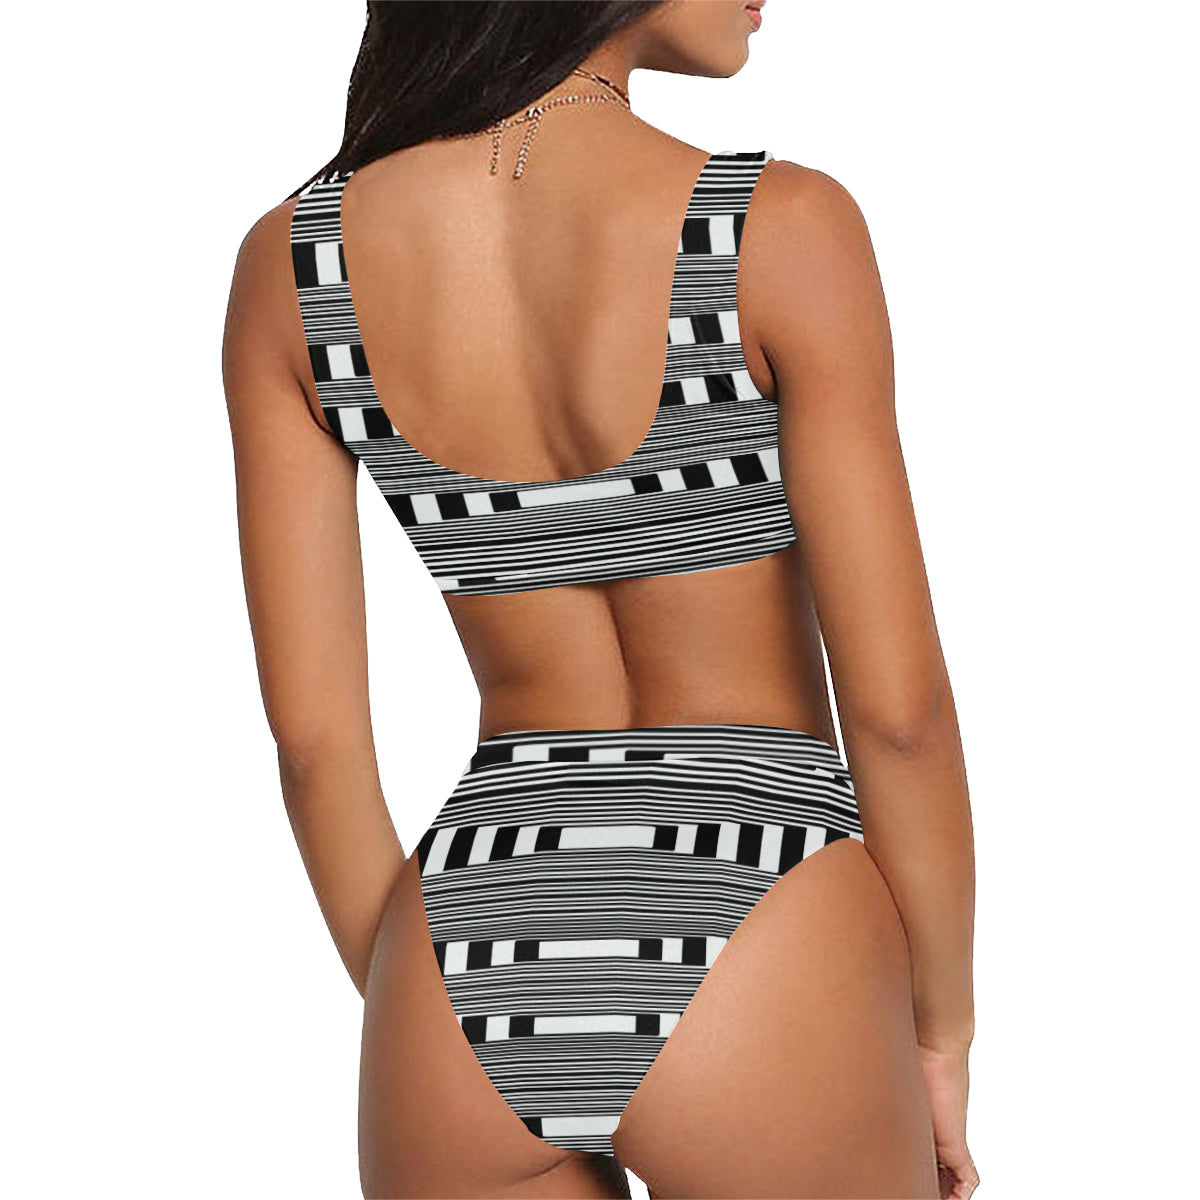 Can't make up my mind Sport Top & High-Waisted Bikini Swimsuit (Model S07)